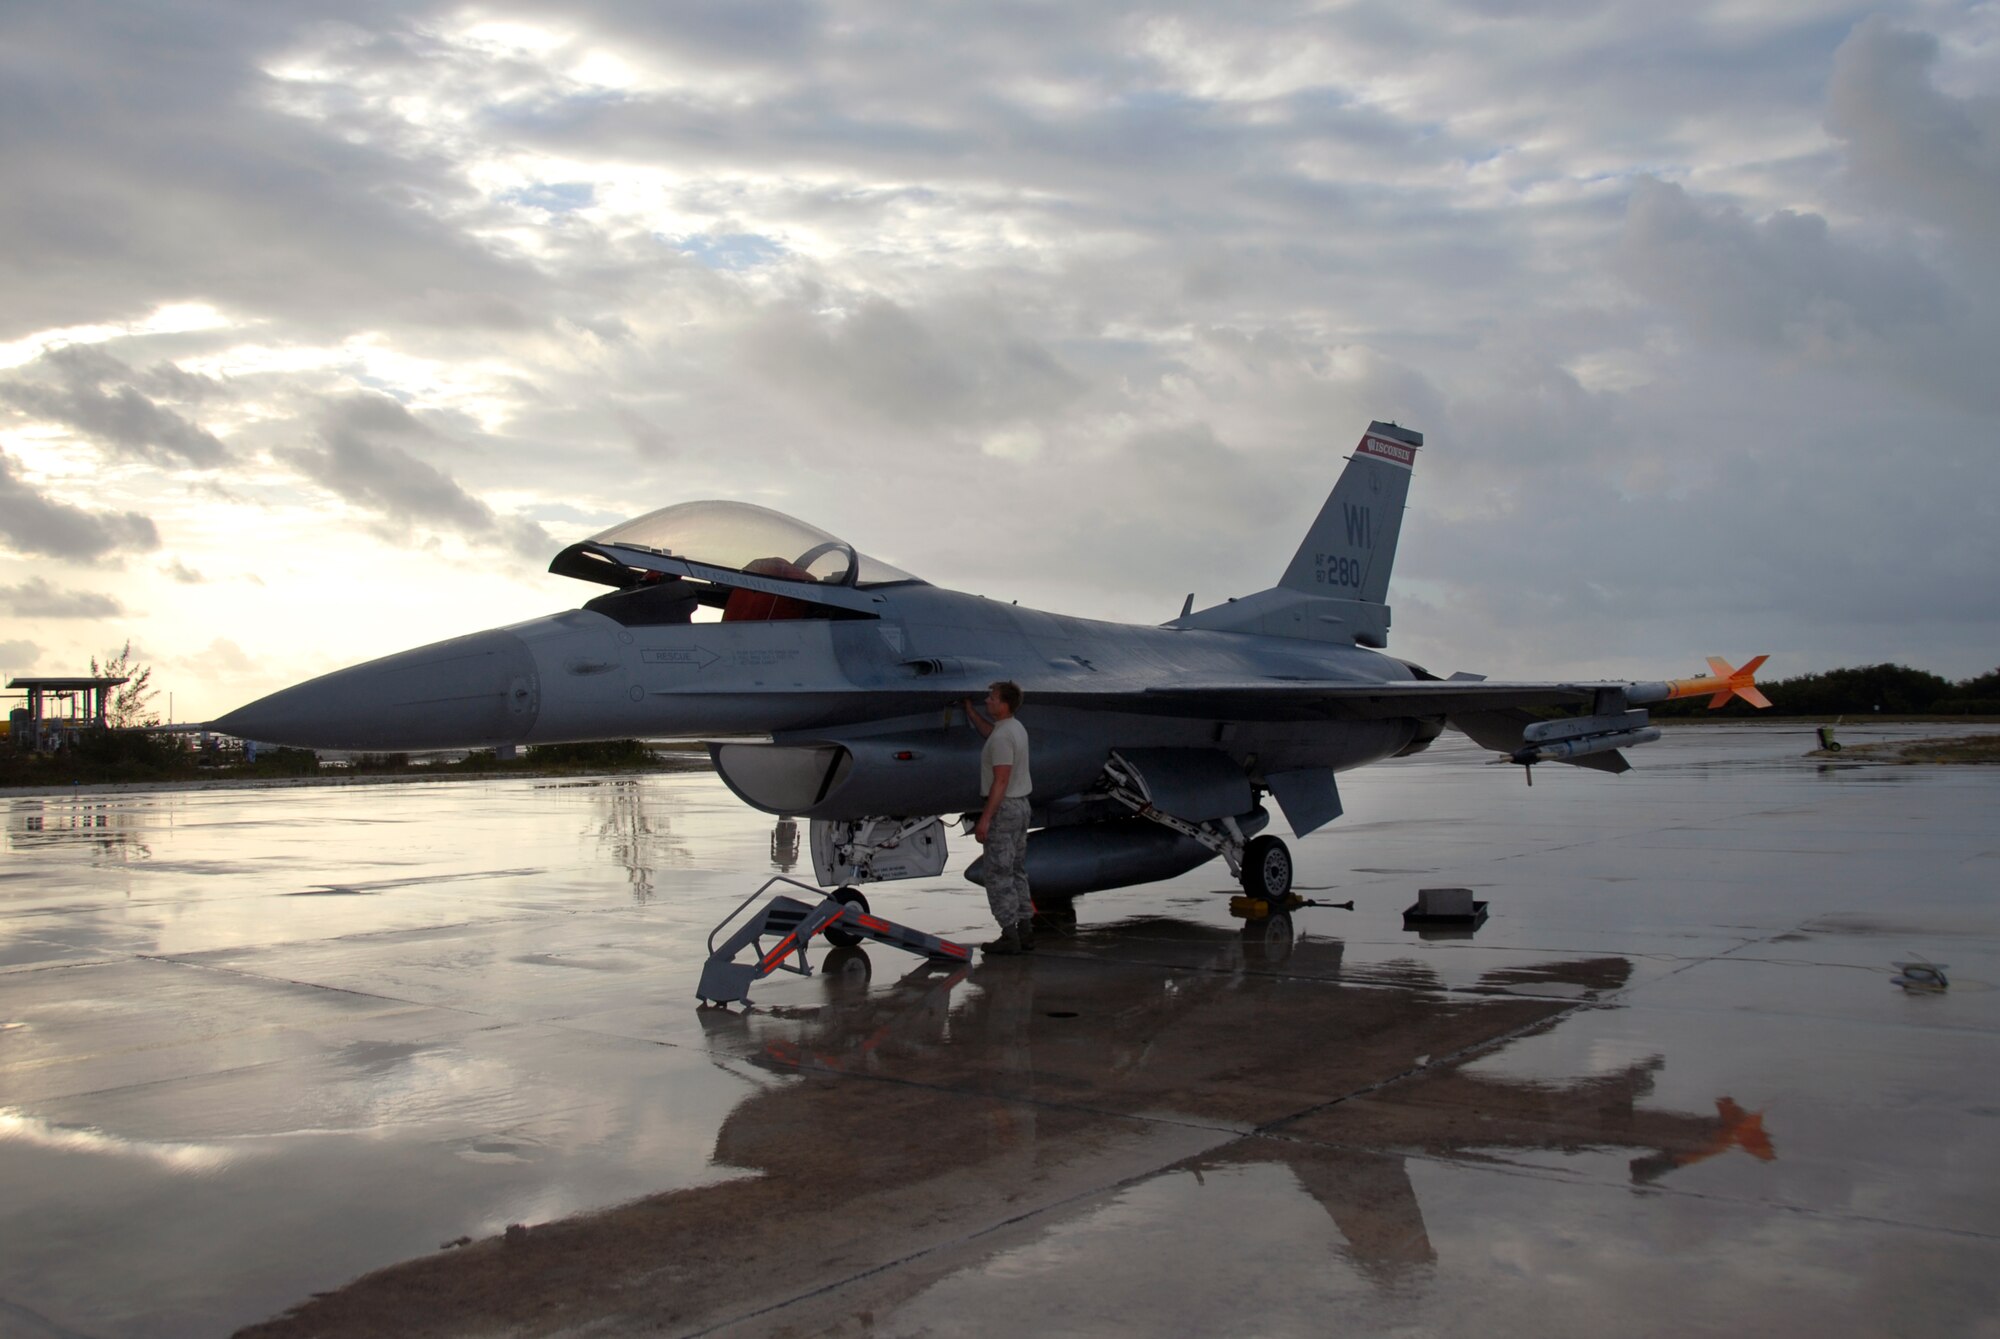 Staff Sgt. Brian Gilbertson, a crew chief with the 115th Fighter Wing, Madison, Wis.,  prepares one of the units F-16C Fighting Falcons for flight after a rain storm April 30, 2009.  The 115th FW participated in an air-to-air combat skills training exercise April 18 - May 2, 2009 along side their naval counterparts from Strike Fighter Squadron 2 (VFA-2), Naval Air Station Lemoore, Calif., while deployed to Naval Air Station Key West, Fla.  The training missions featured air-to-air and air-to-ground offensive and defensive combat tactics designed to simulate real-world operations.  (U.S. Air Force photo by: Master Sgt. Dan Richardson)